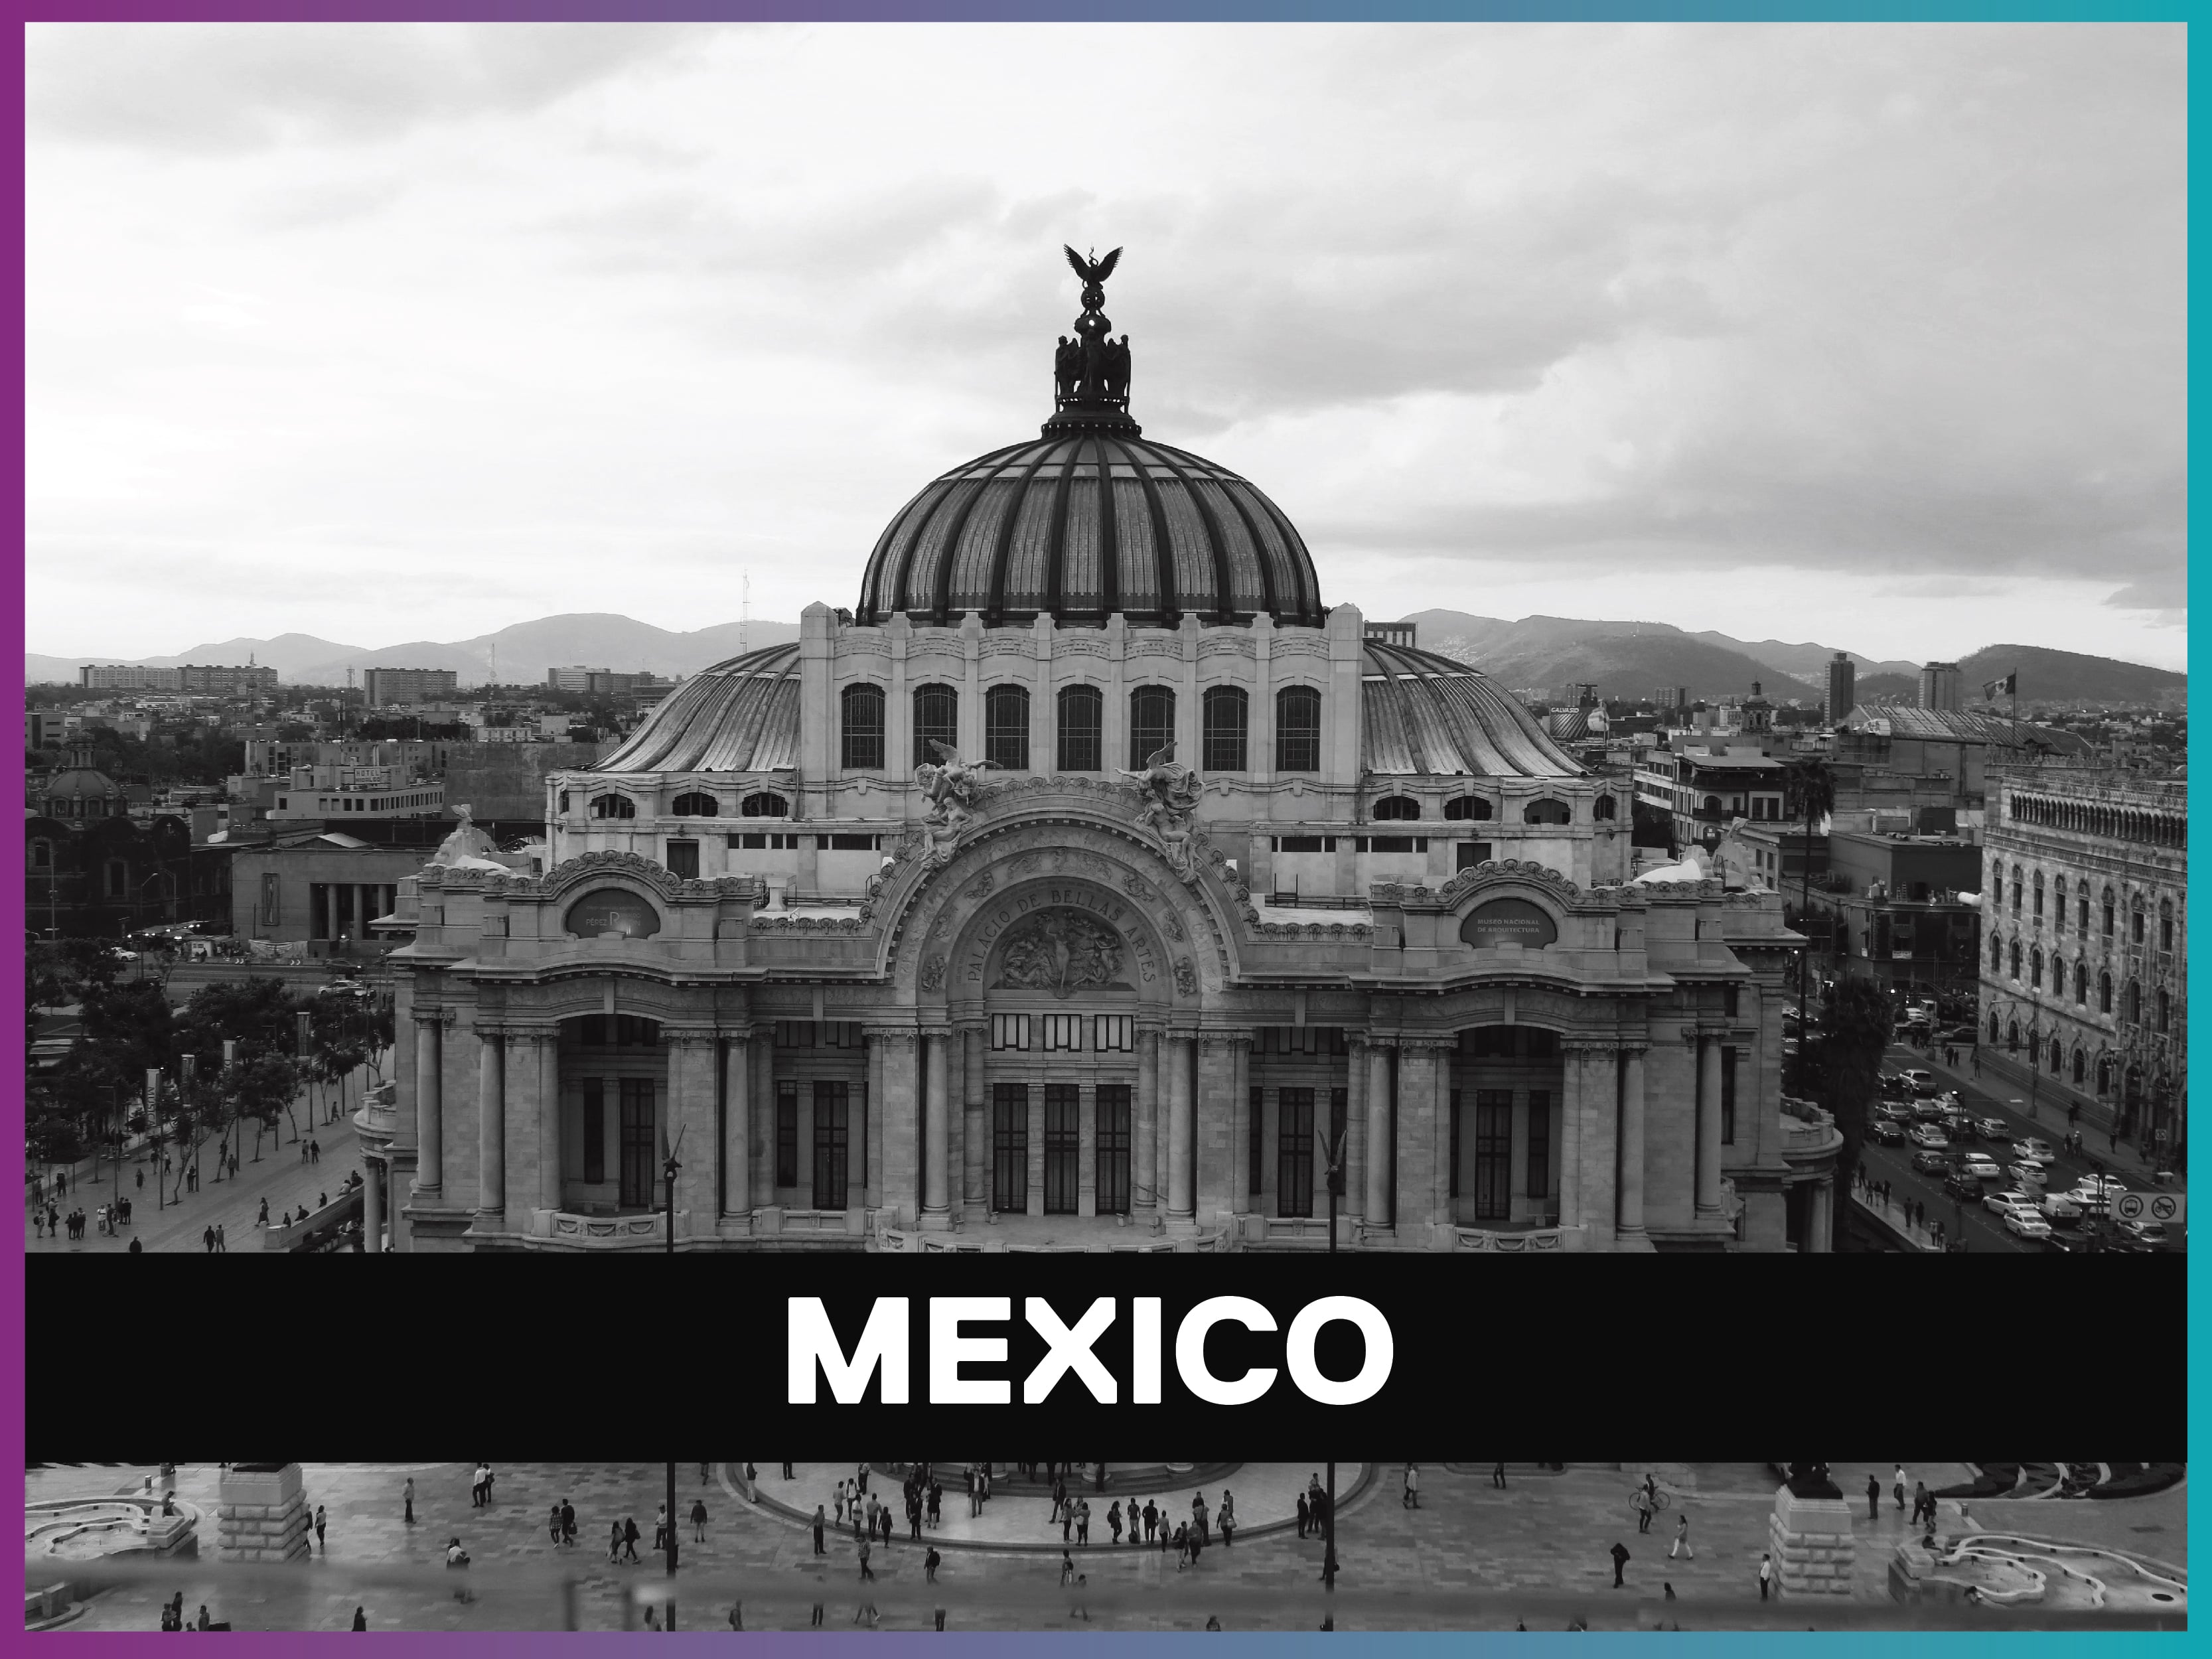 Mexico is written on a banner on top of a black and white picture of a monument in Mexico